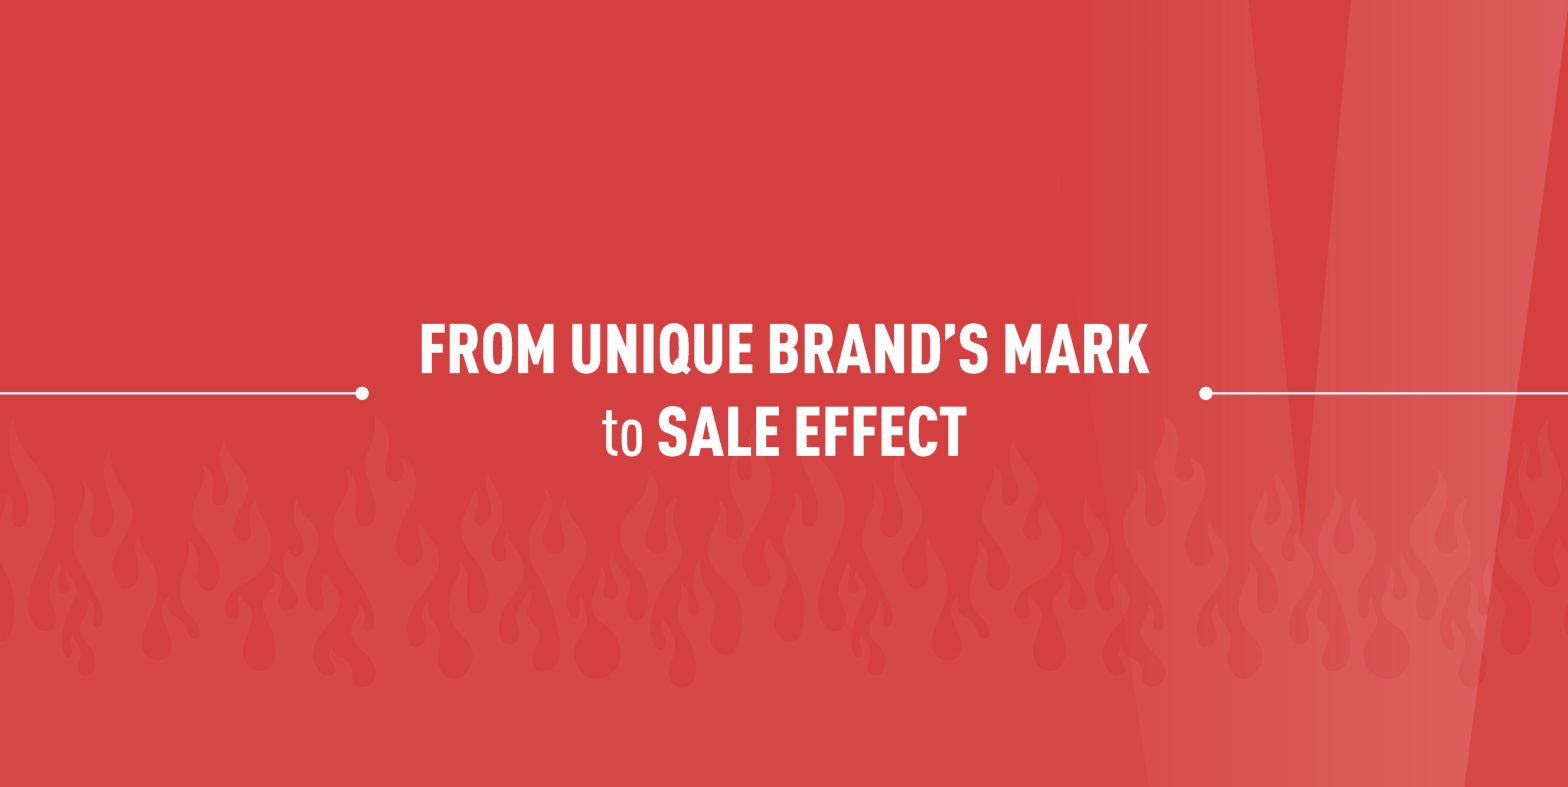 FROM UNIQUE BRAND’S MARK TO SALES EFFECT